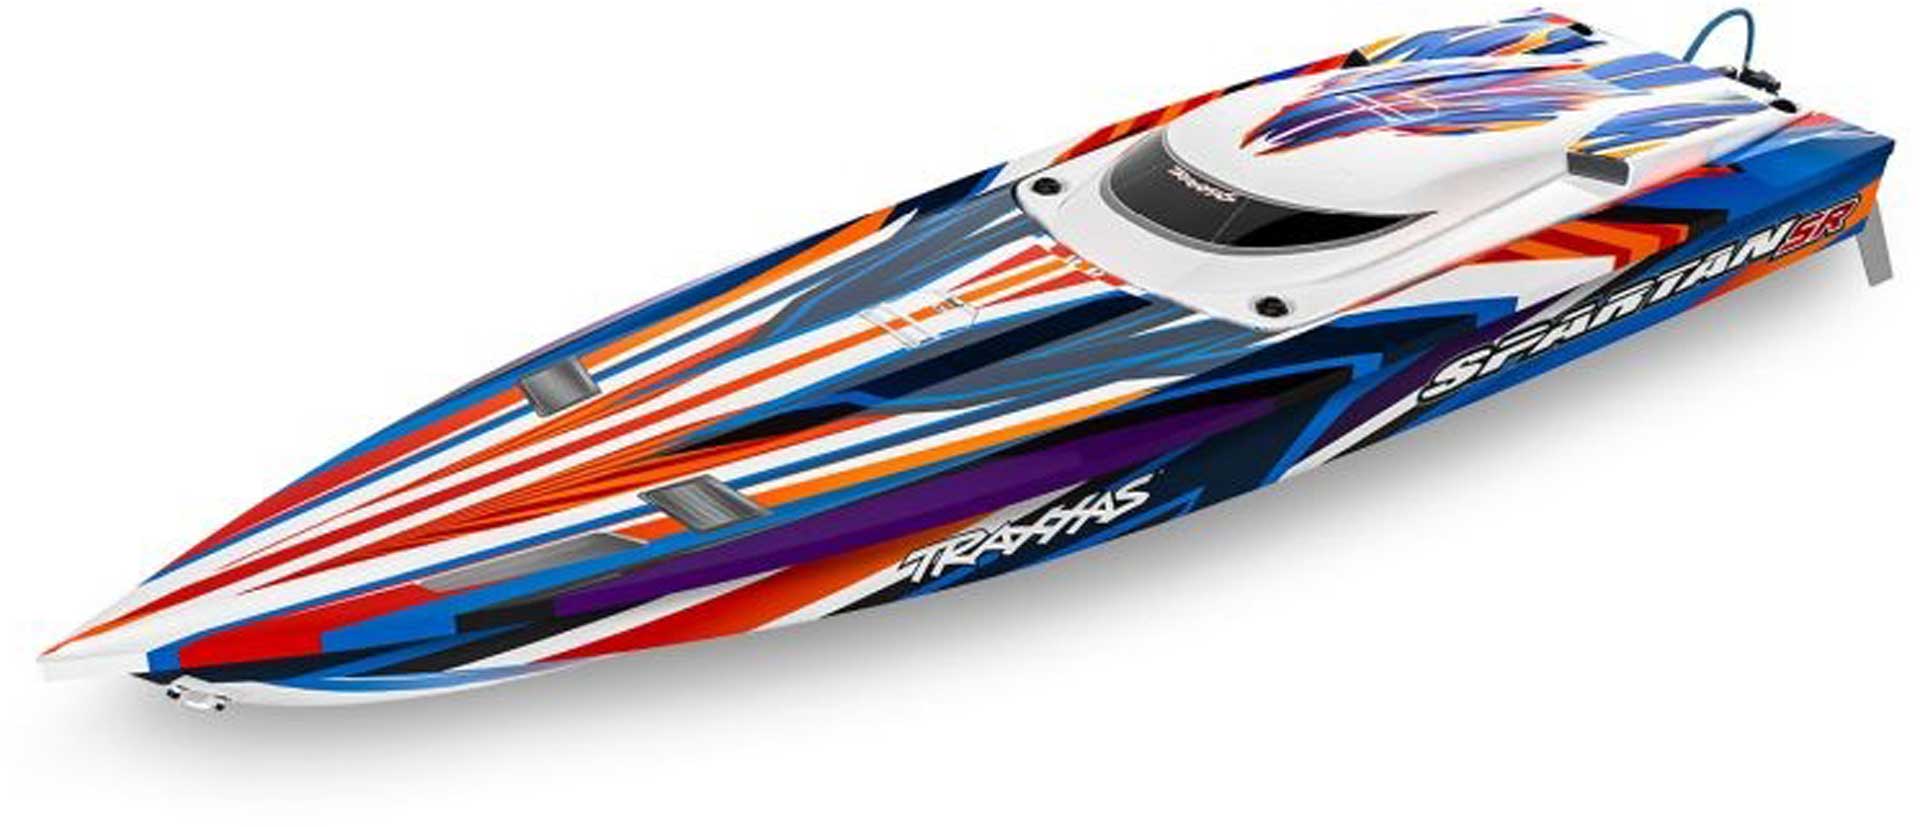 TRAXXAS SPARTAN SR ORANGE 36-INCH RACING BOAT WITH SELF-RIGHTING BRUSHLESS WITHOUT BATTERY AND CHARGER